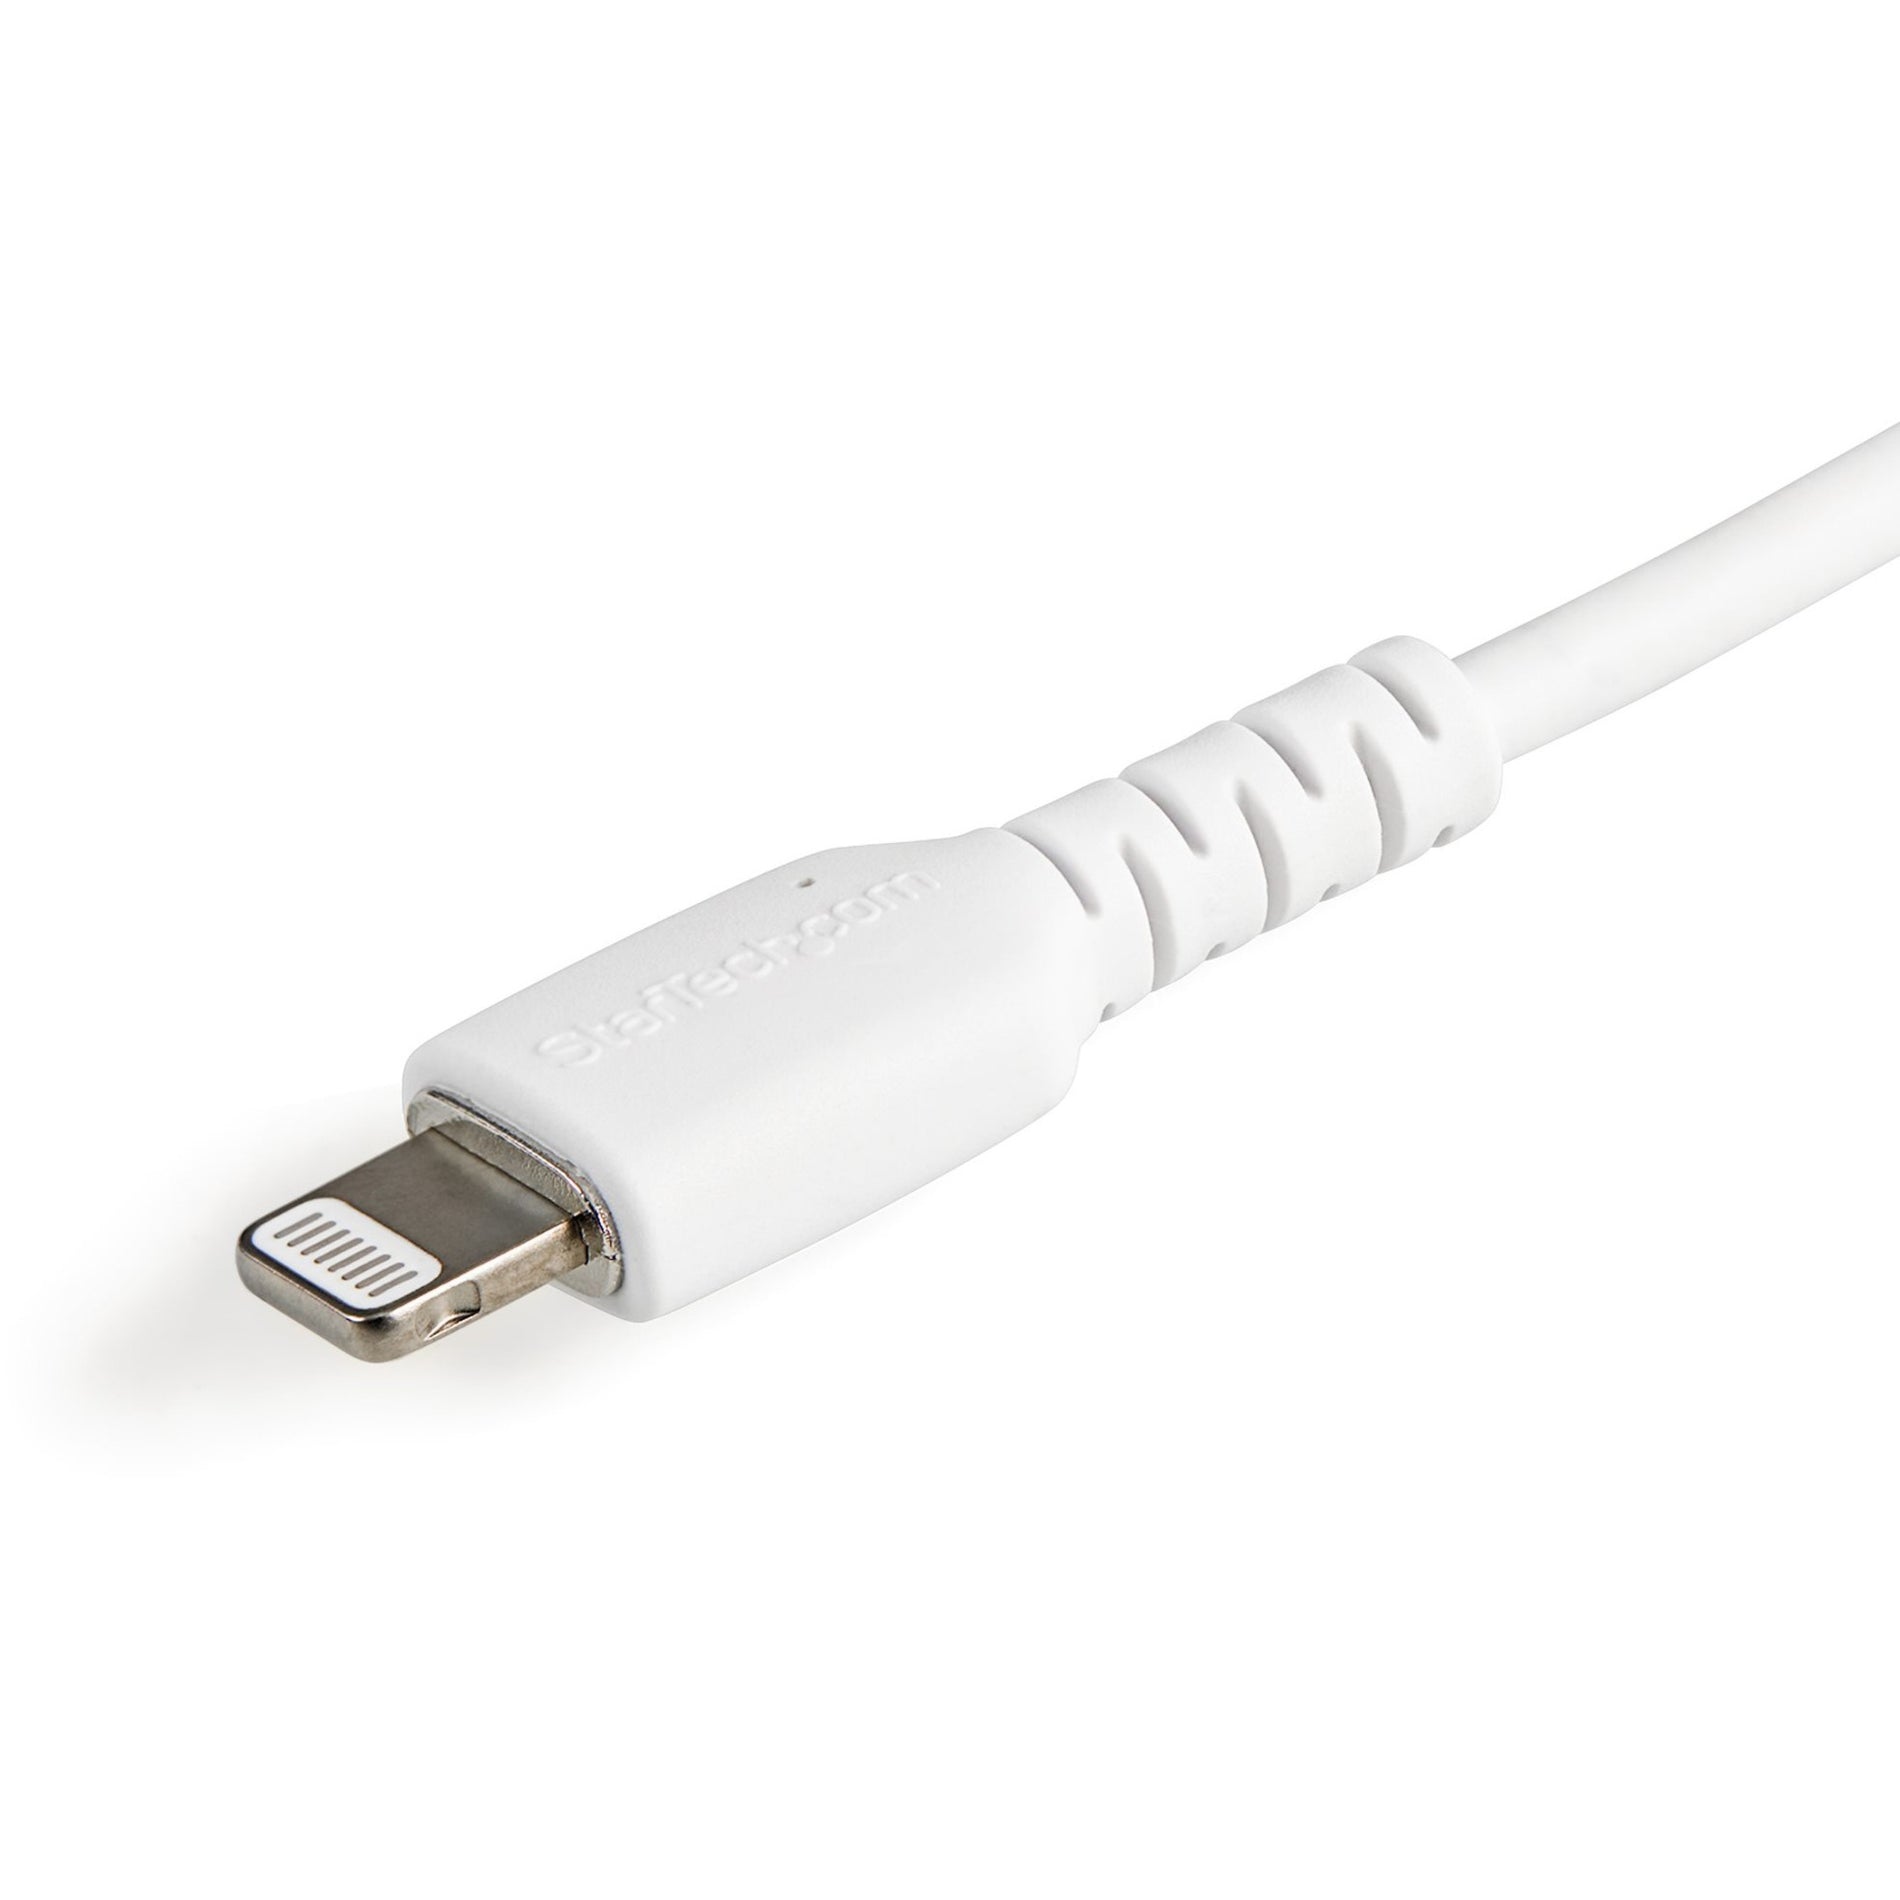 StarTech.com RUSBLTMM30CMW Lightning/USB Data Transfer Cable, White Rugged iPhone iPad Charge/Sync Charger Cord w/Aramid Fiber Apple MFI Certified